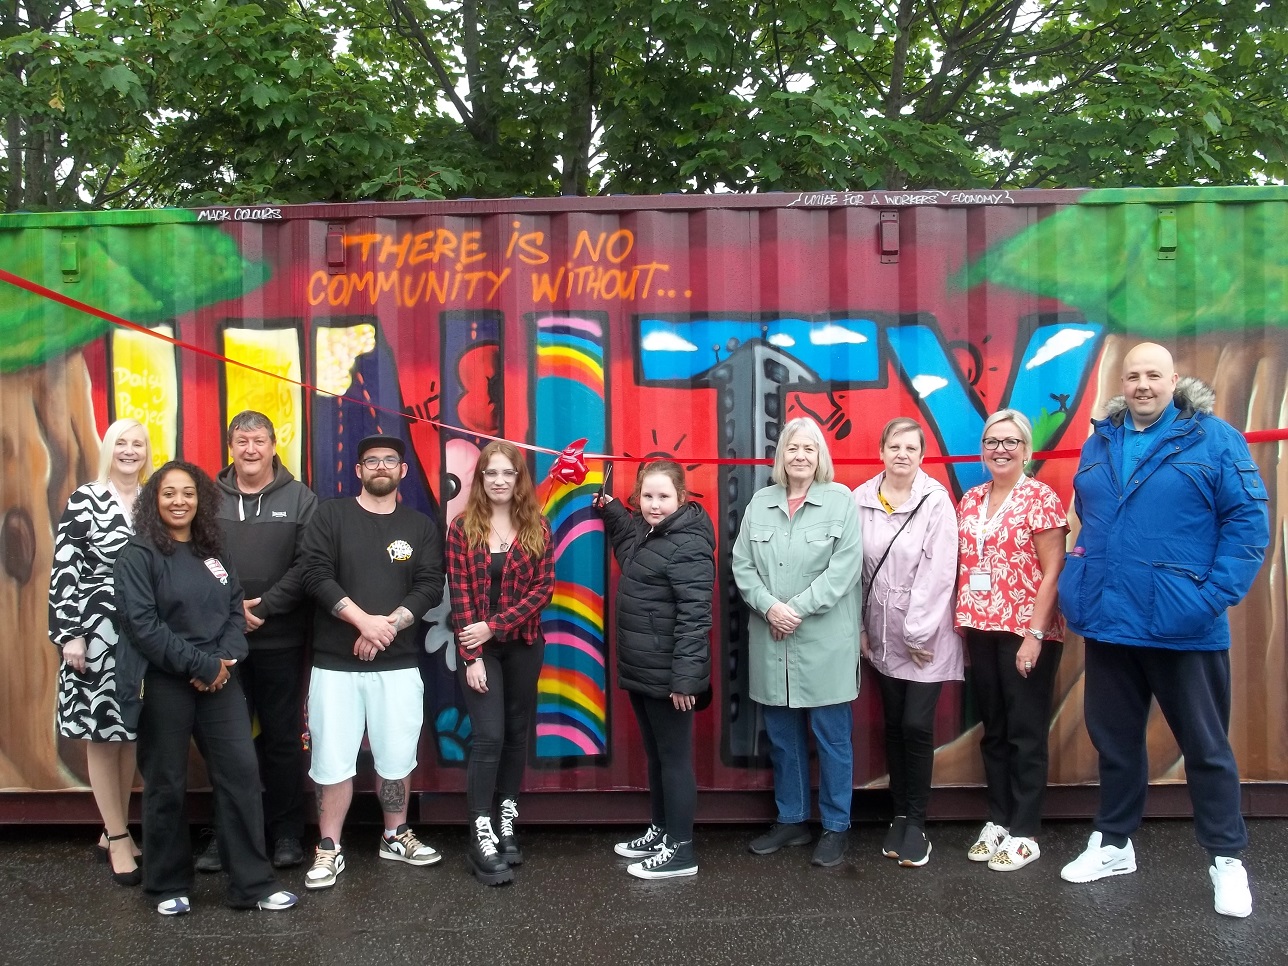 Castlemilk pantry marks 2nd anniversary with community event and new mural